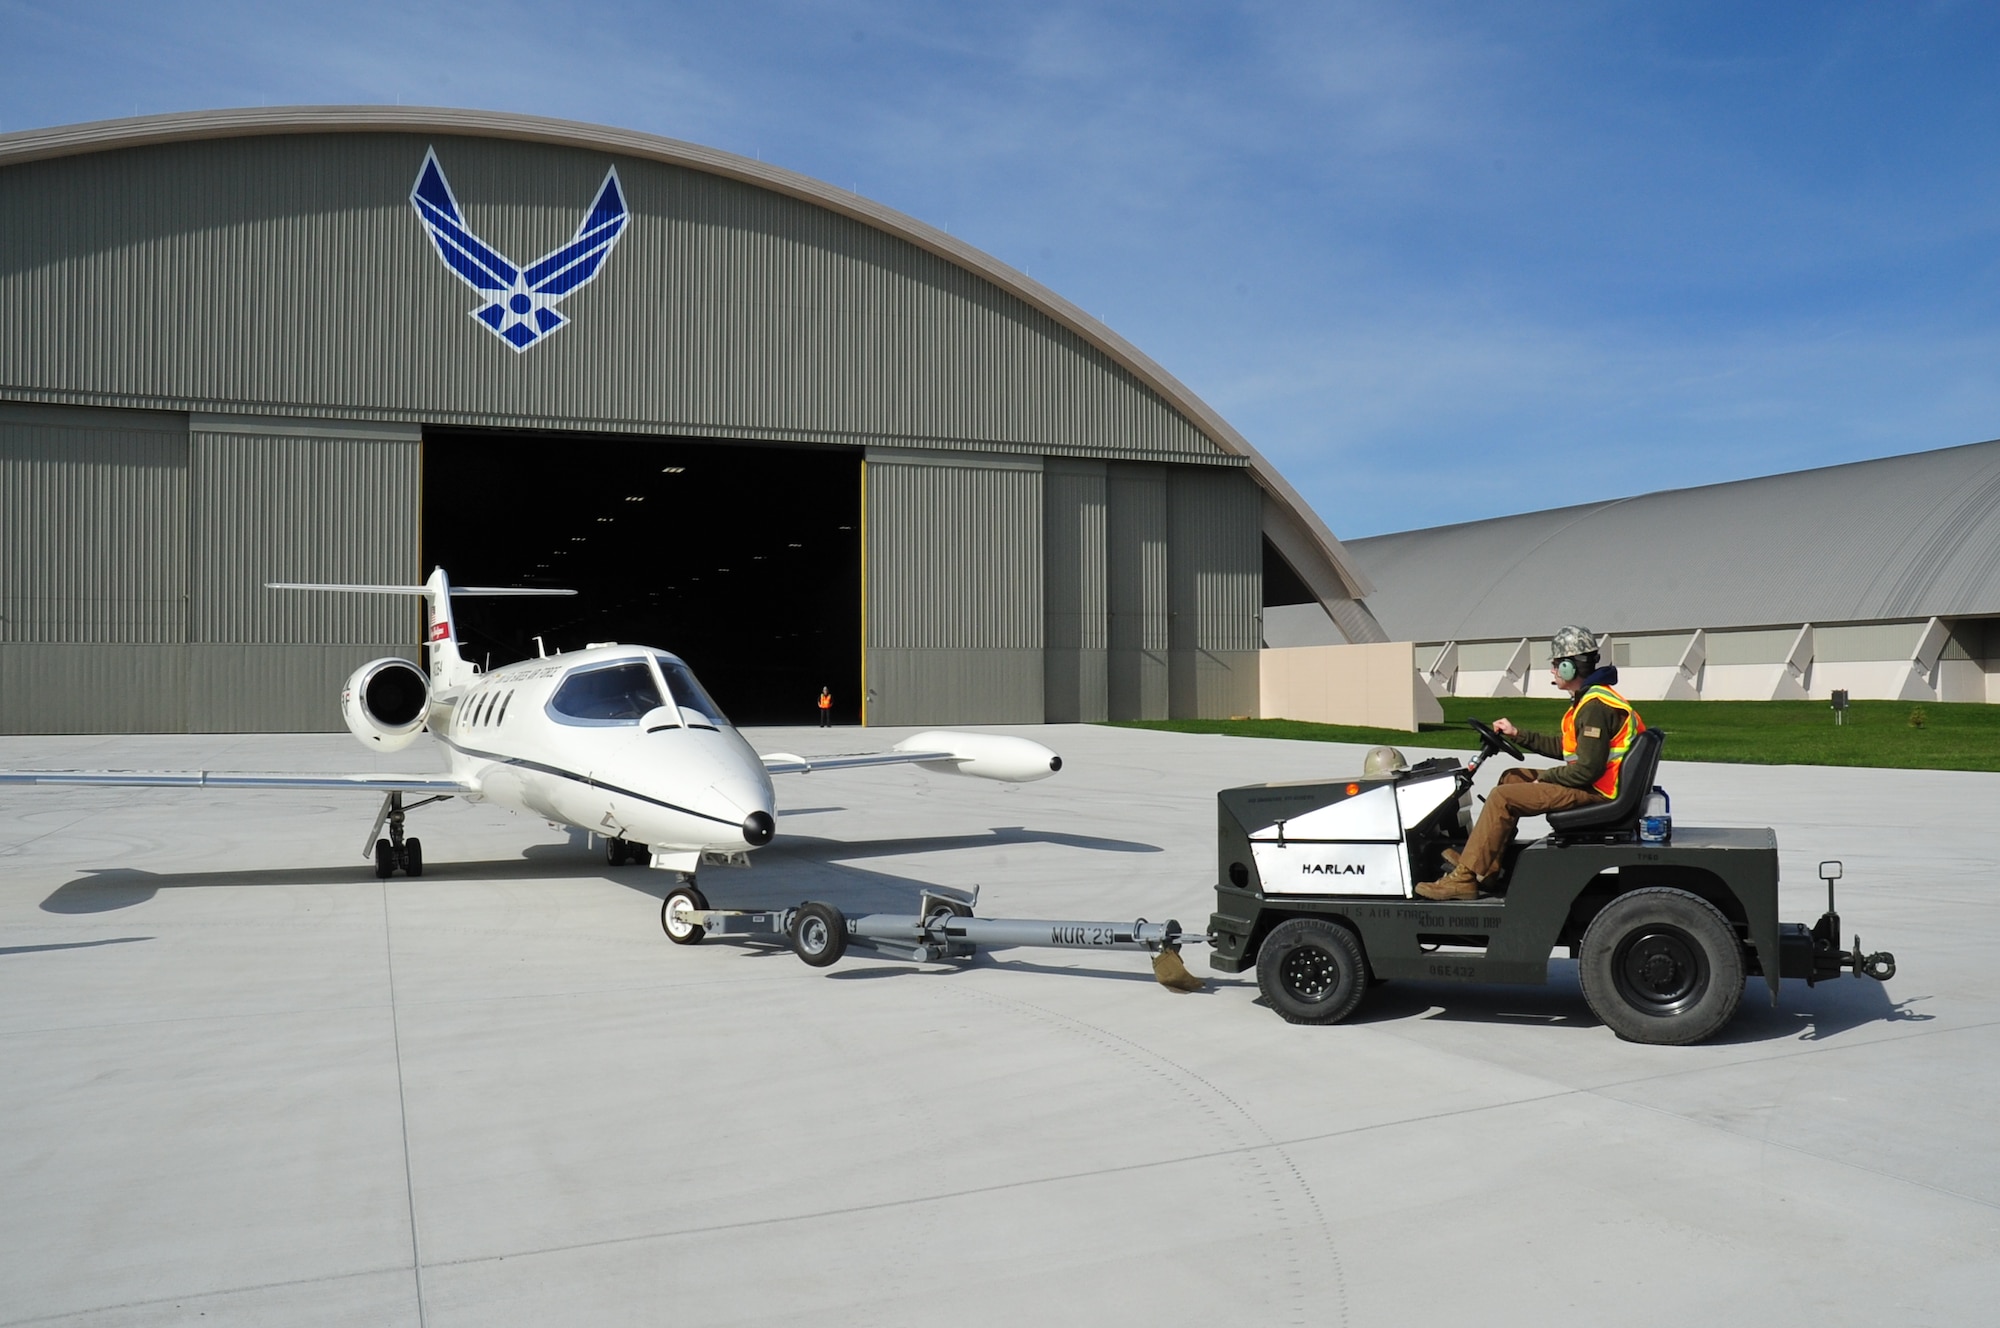 DAYTON, Ohio -- Museum Restoration crews move the Learjet C-21A aircraft into the new fourth building at the National Museum of the U.S. Air Force on March 30, 2016. (U.S. Air Force photo by Ken LaRock)